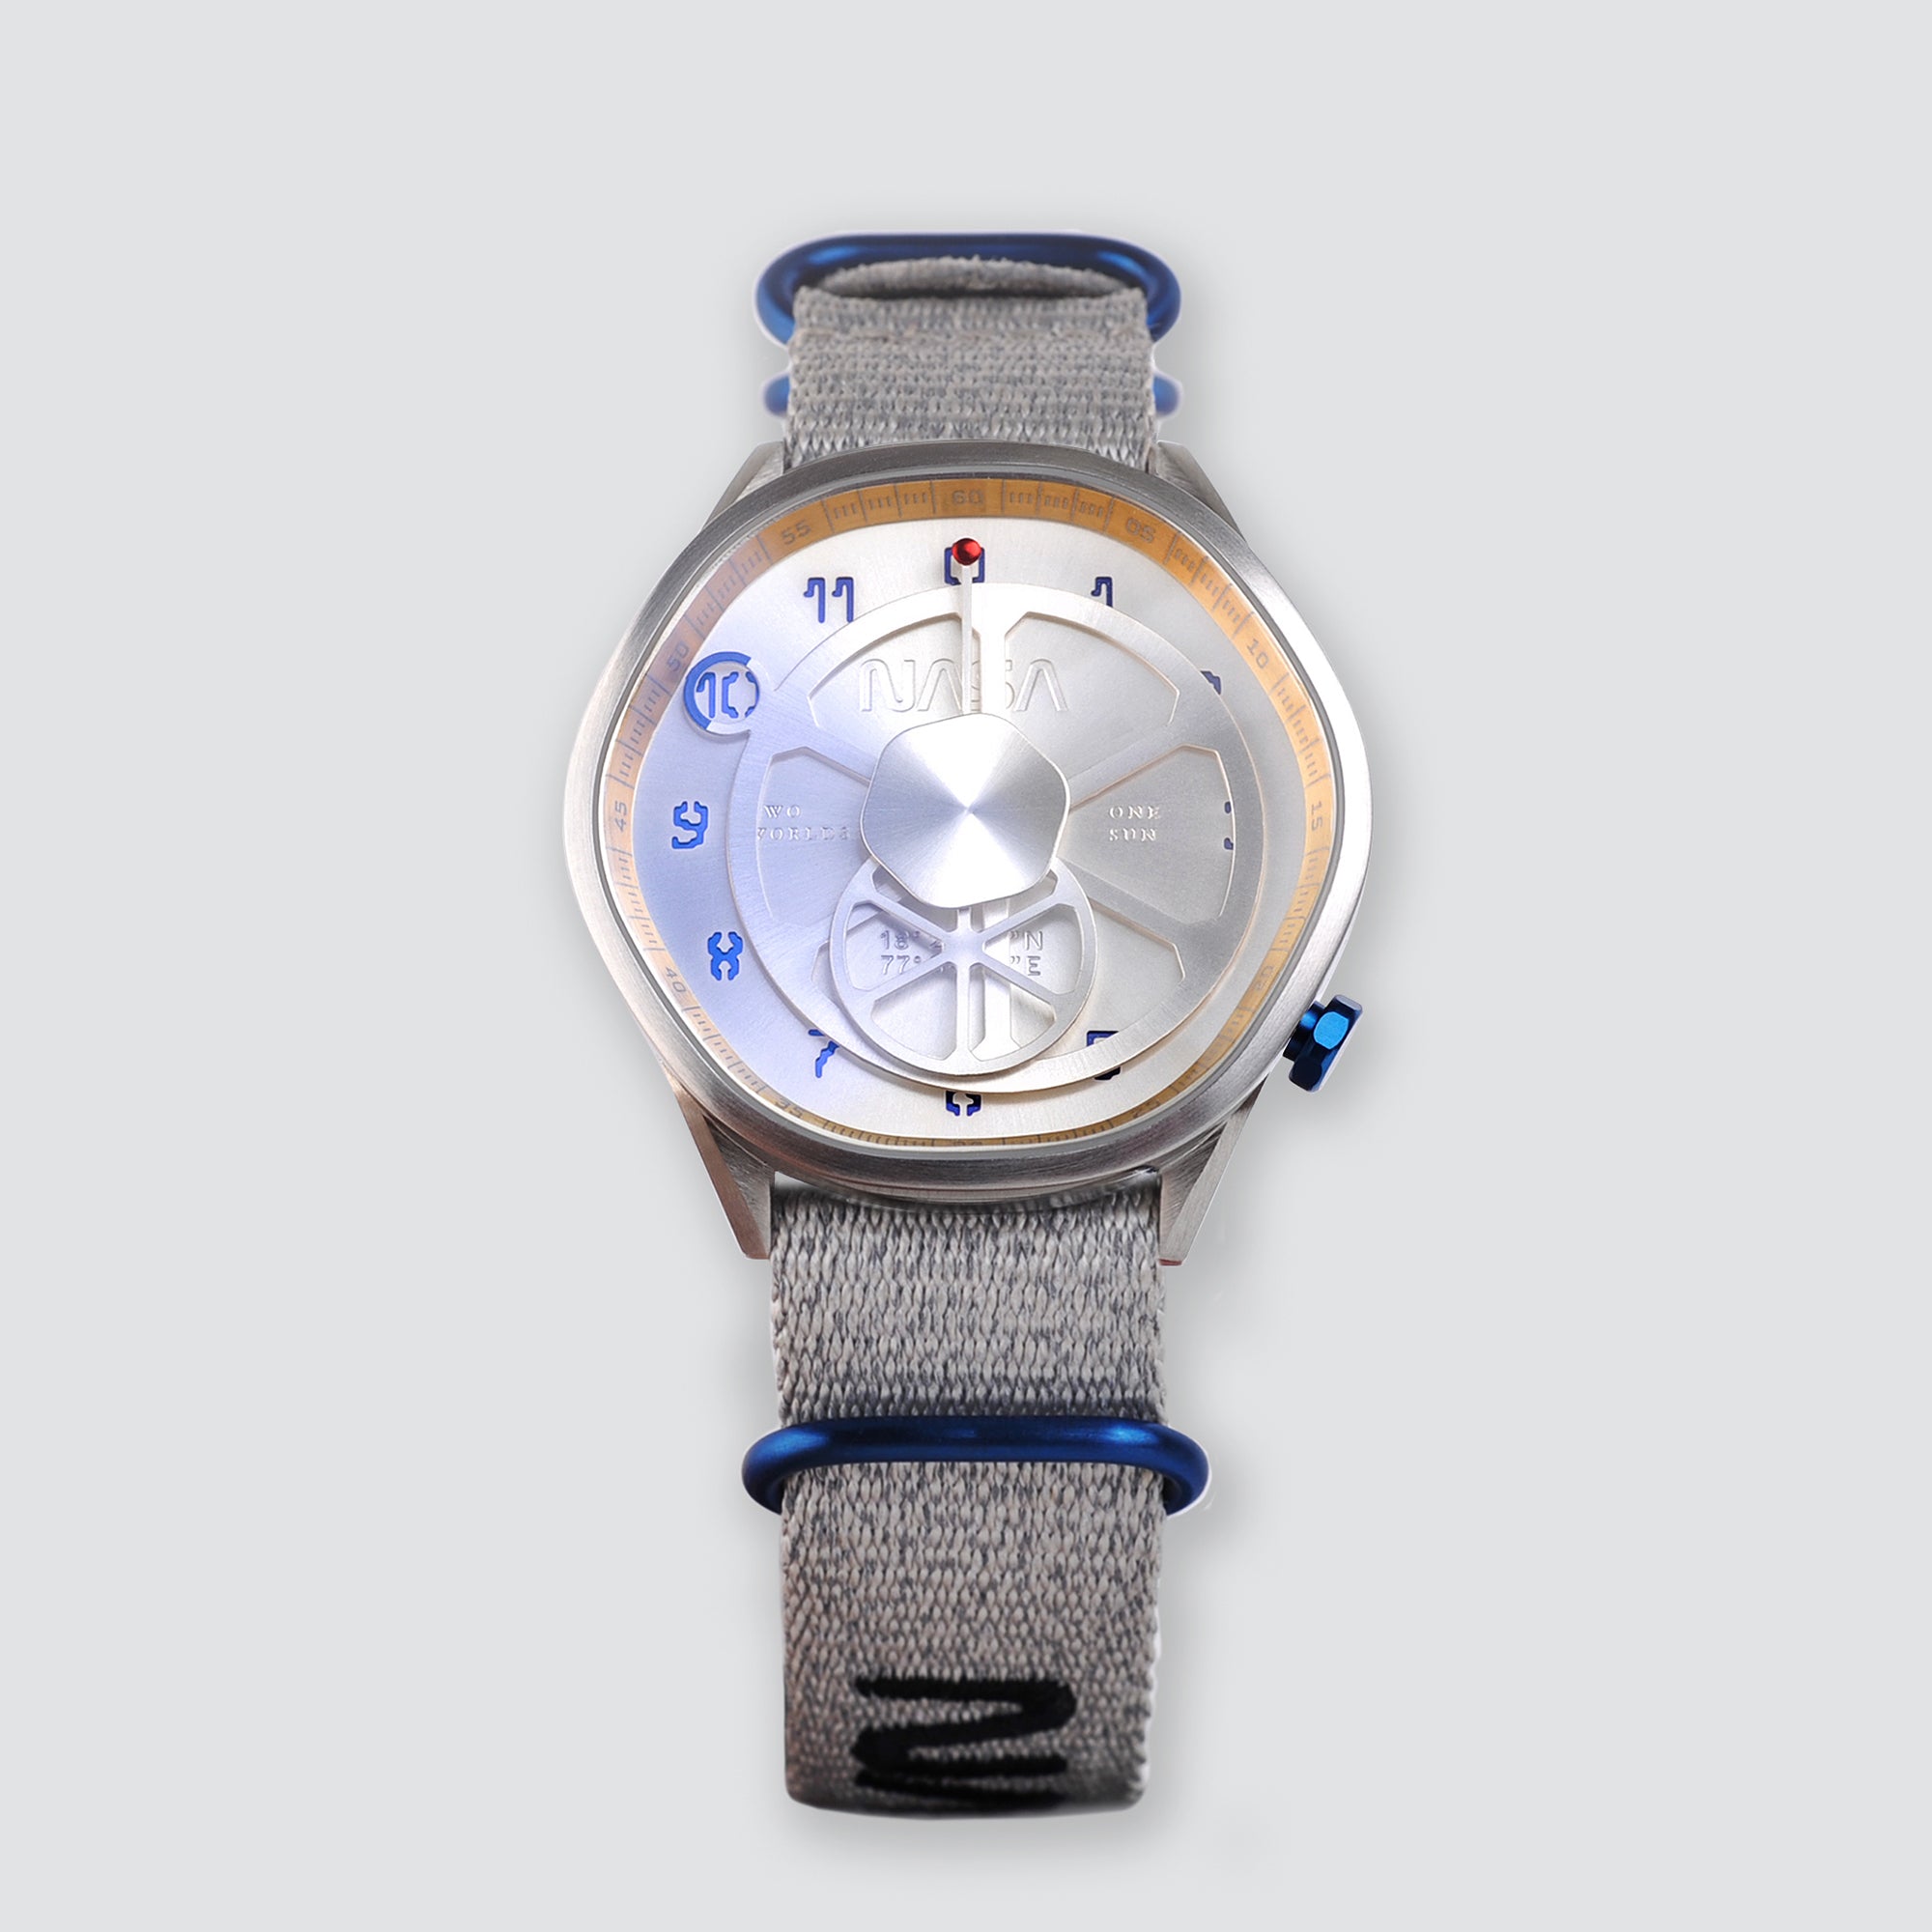 The Mars Time, a watch inspired by Nasa's Perseverance Rover’s landing site Jezero Crater and designed by Anicorn Watches, placed on a white background. View 2